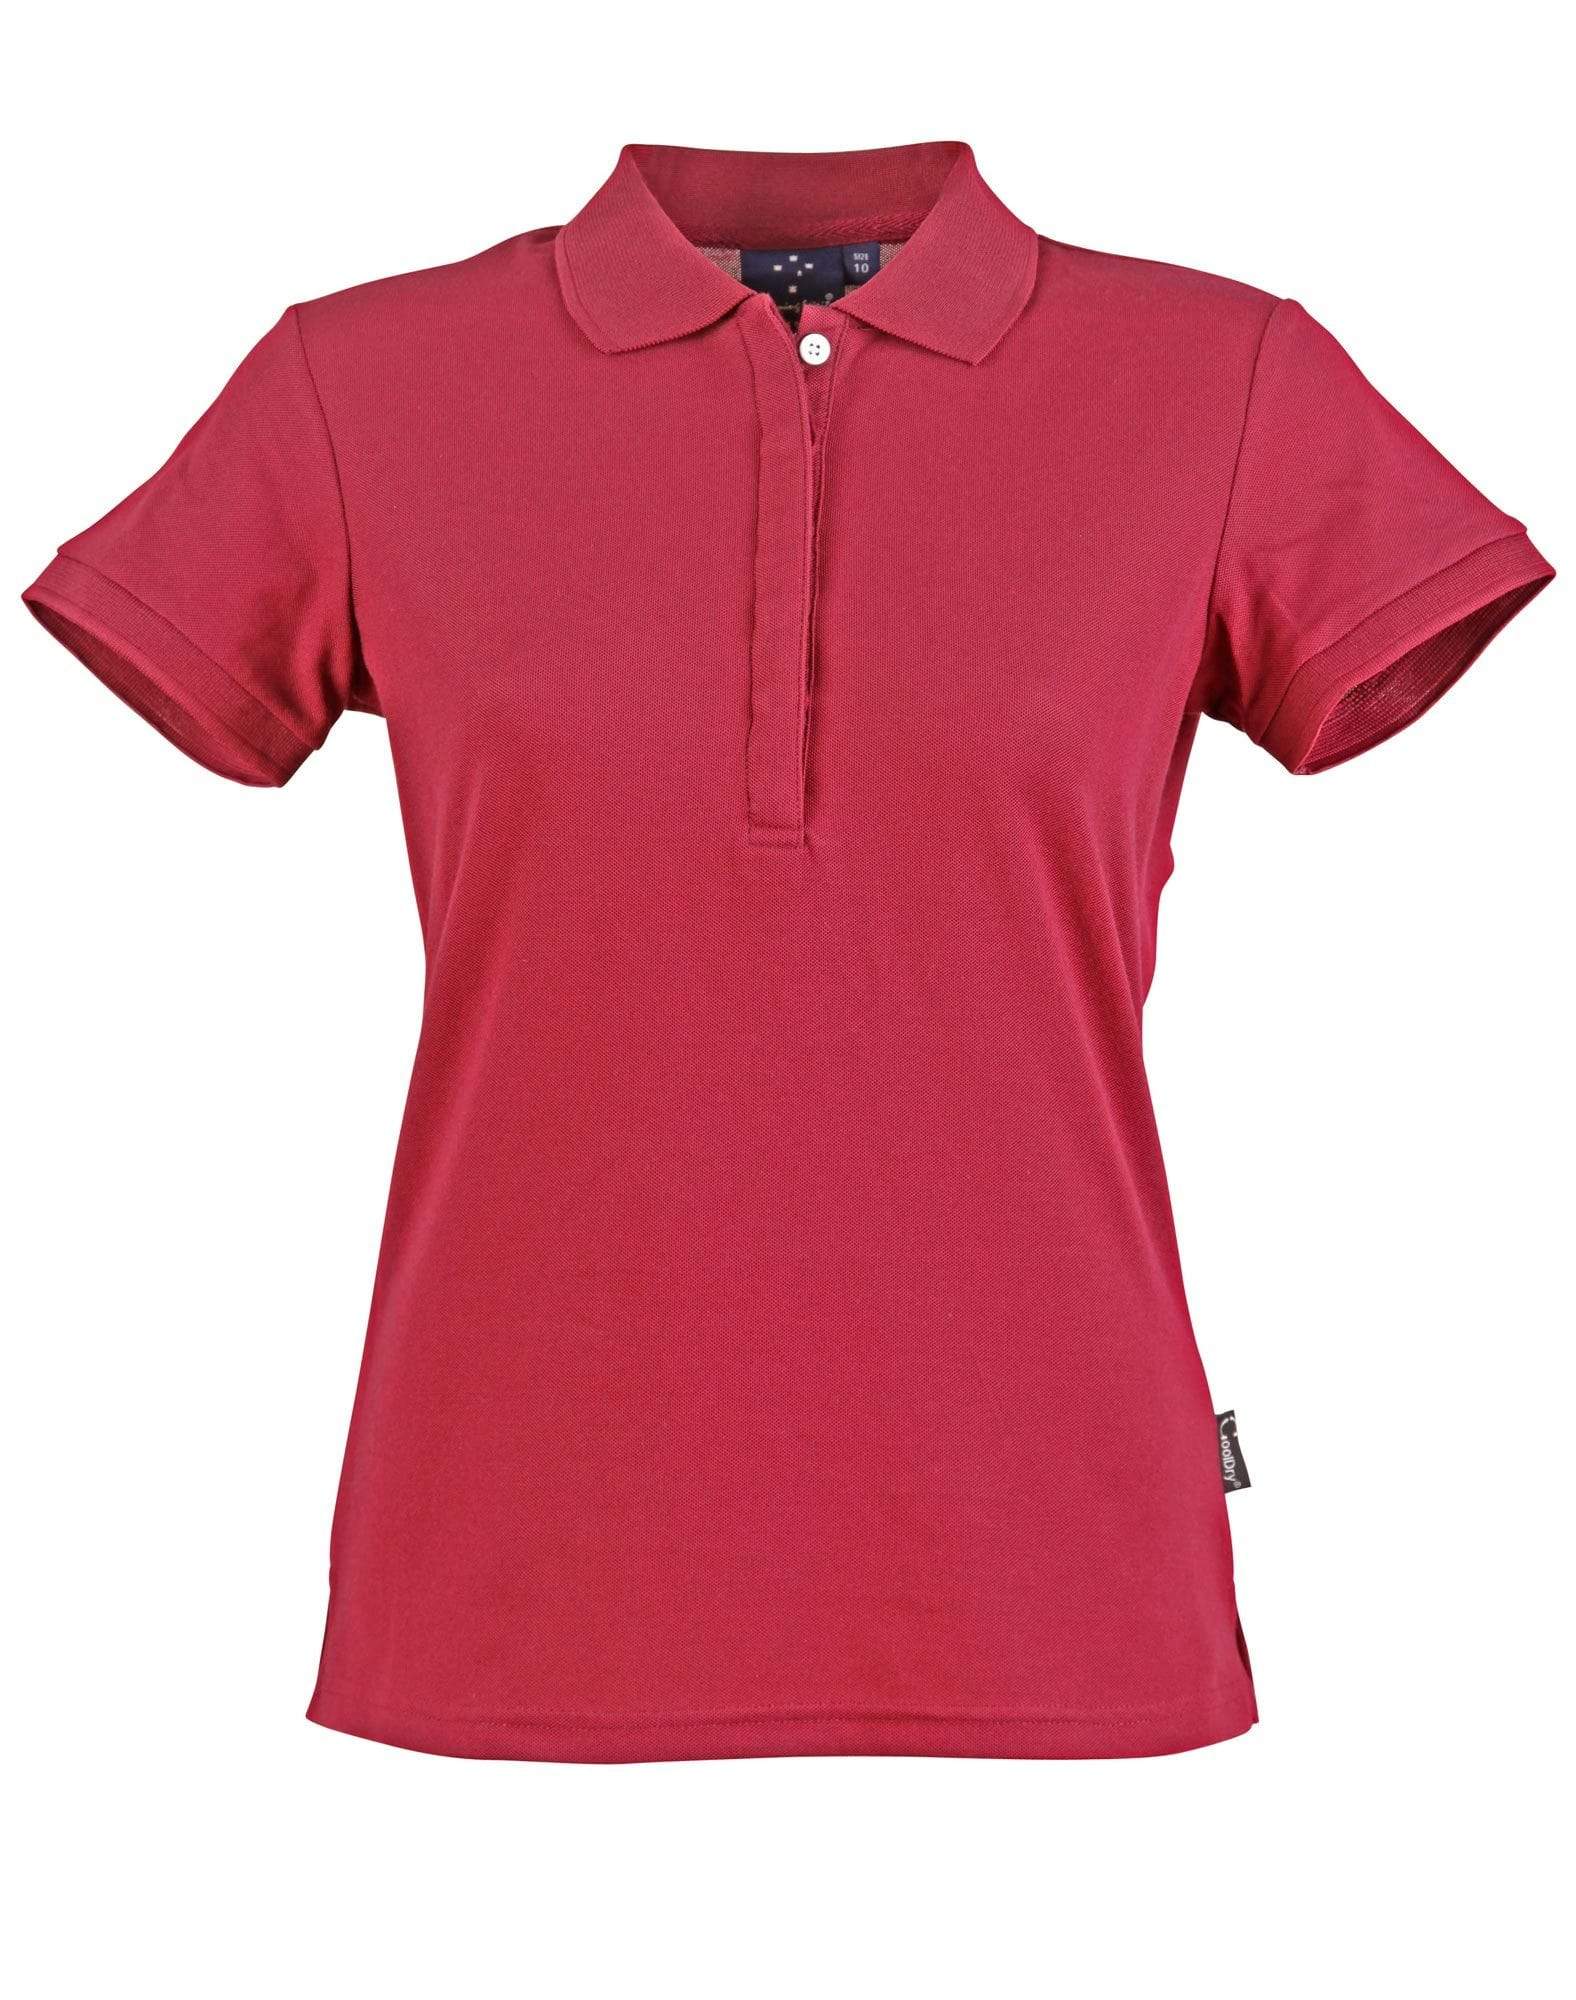 Connection Polo Ladies' Ps64 Casual Wear Winning Spirit Maroon 8 